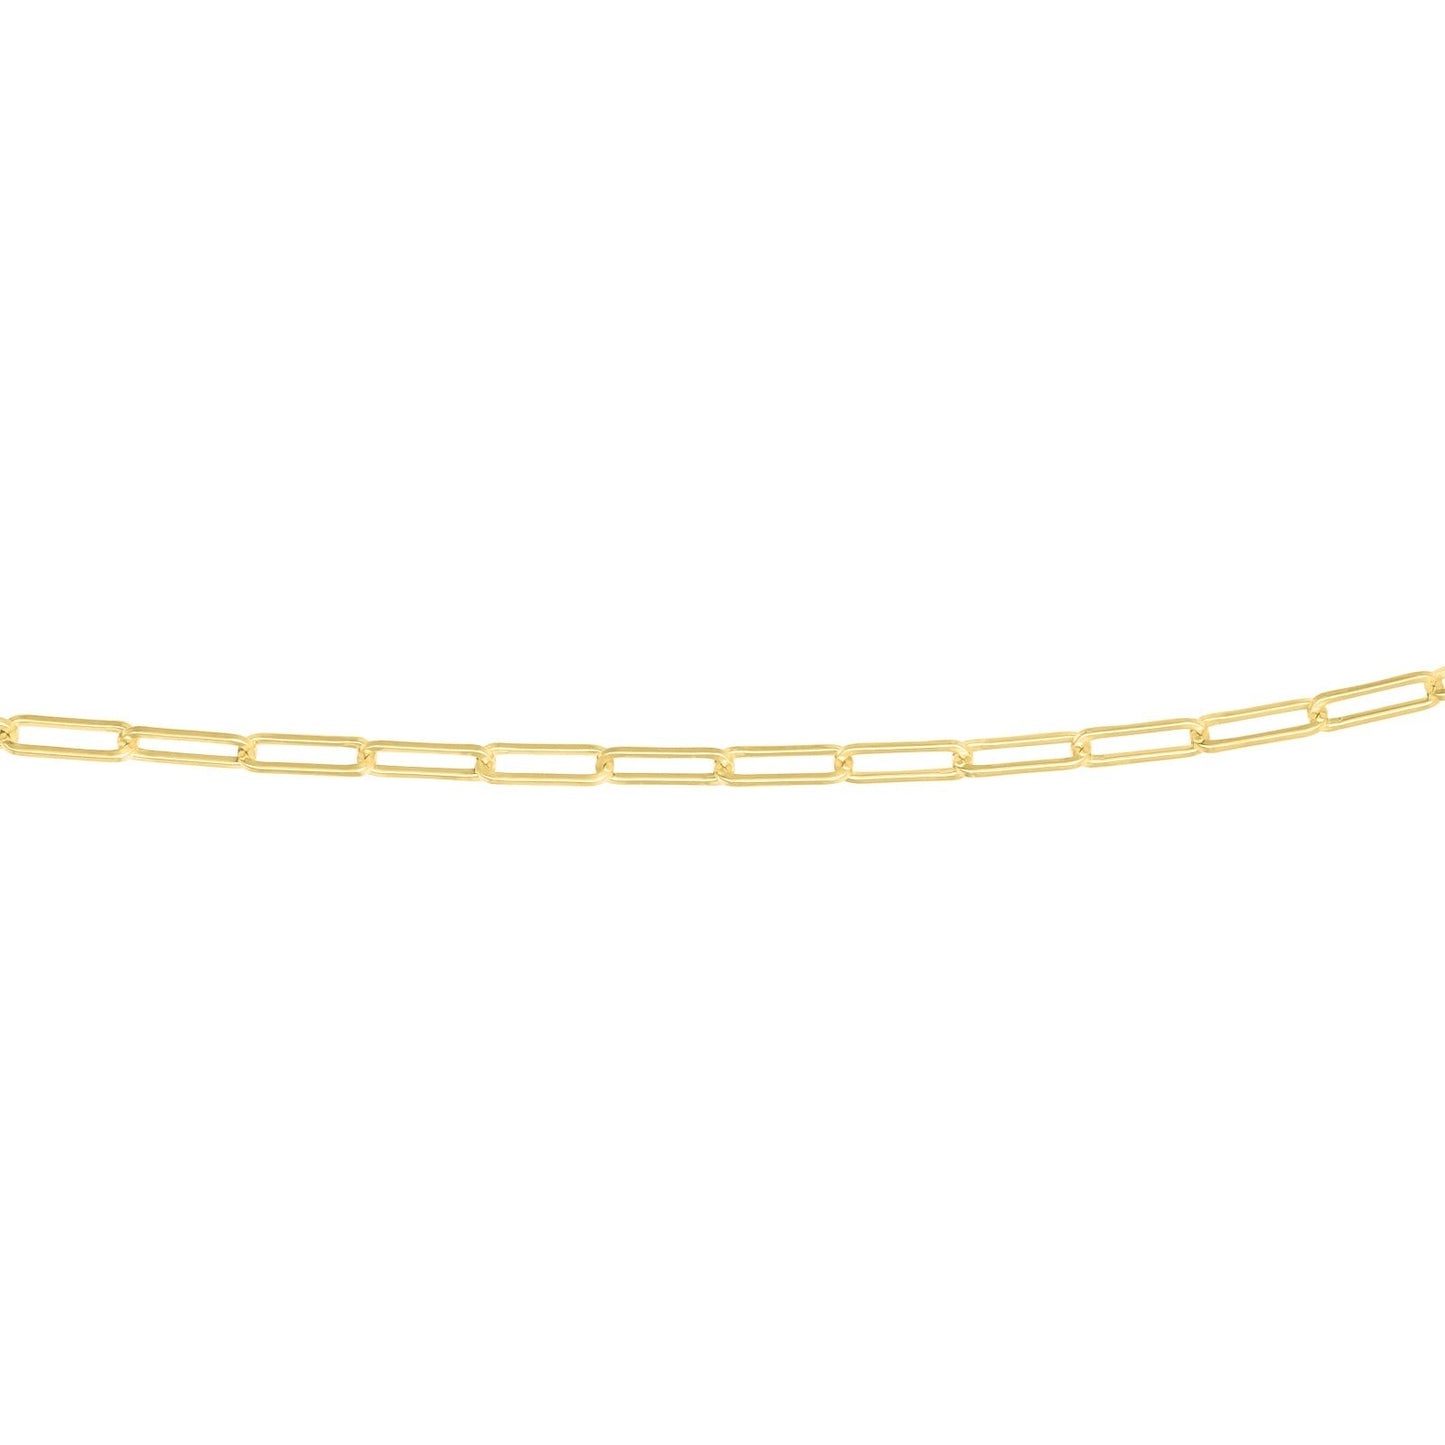 14k gold Paperclip Chain Necklace